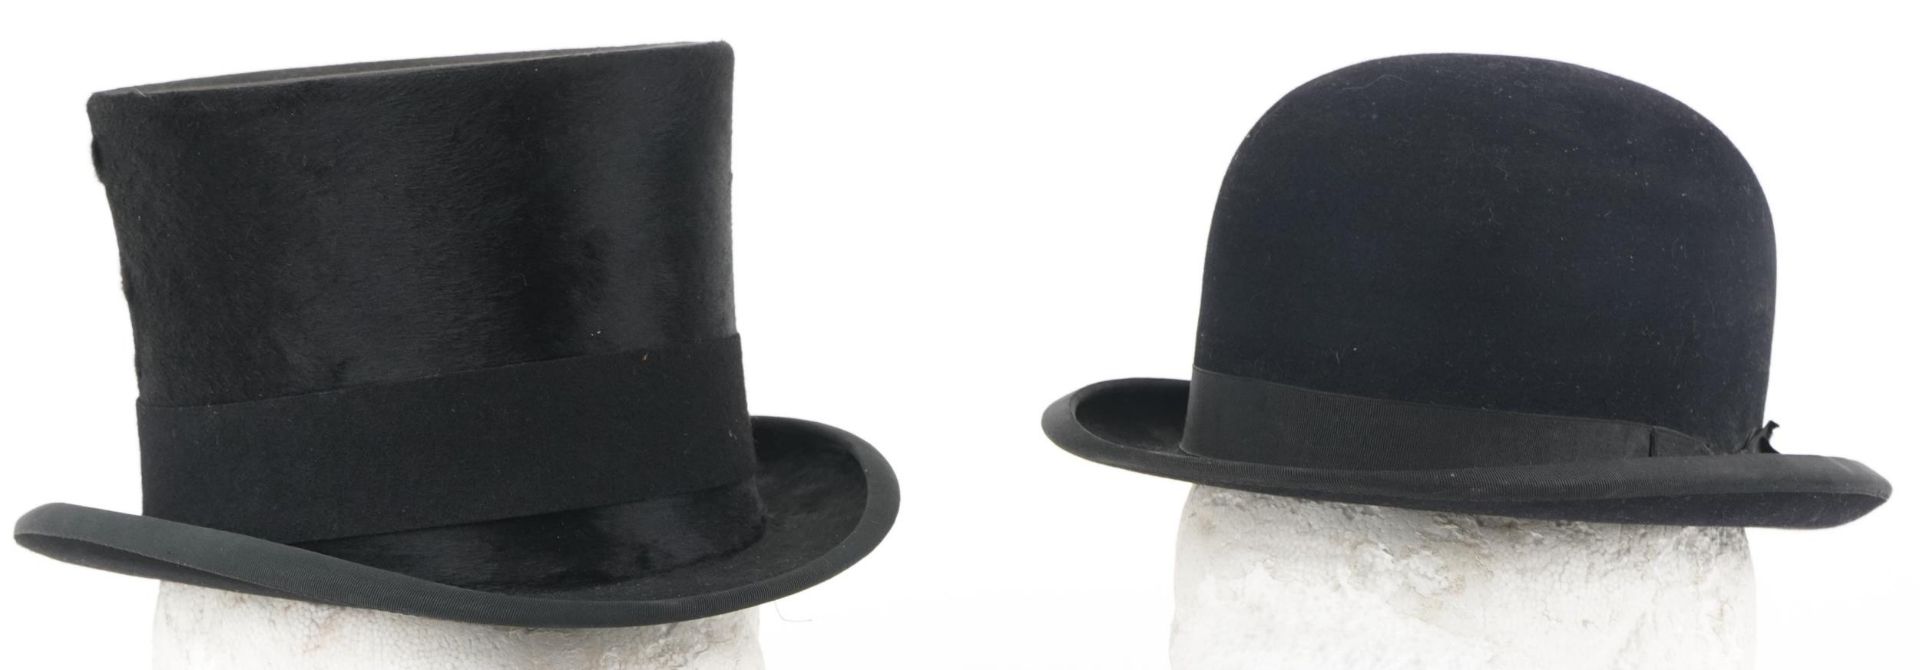 Early 20th century moleskin top hat by Lincoln Bennett & Co of Piccadilly London and a similar